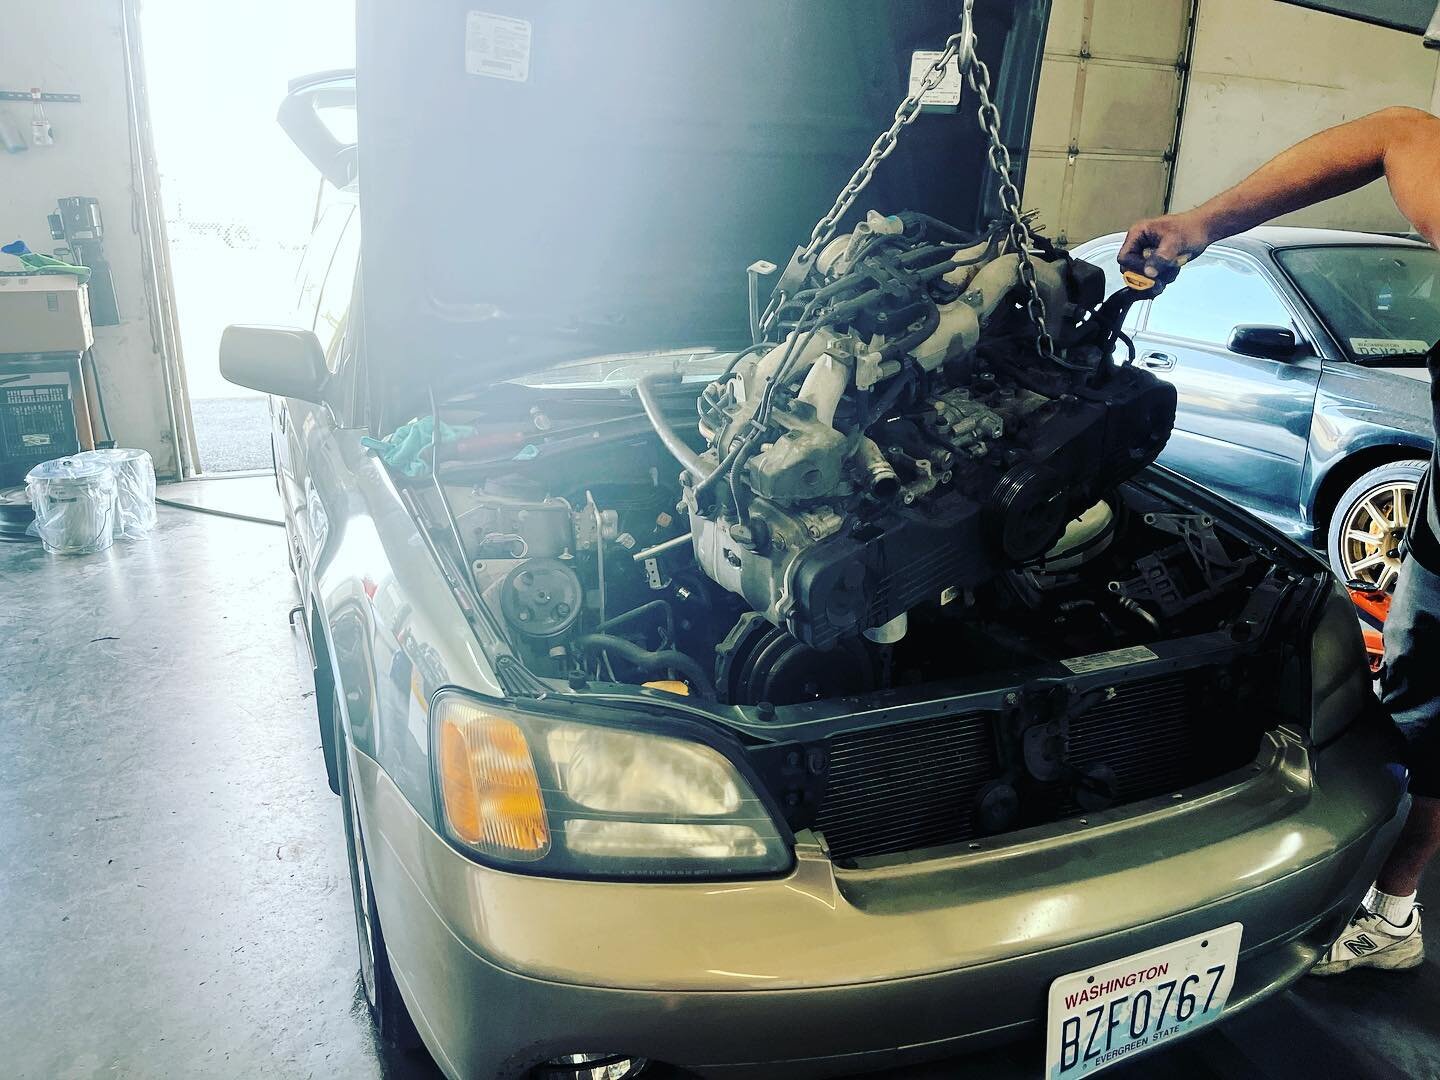 Lots of subaru work in the shop, head gaskets on an Outback with Nate and our tow trucks keeping busy with everything from Porsche&rsquo;s with flat tires to the frito lay truck! Great job guys!